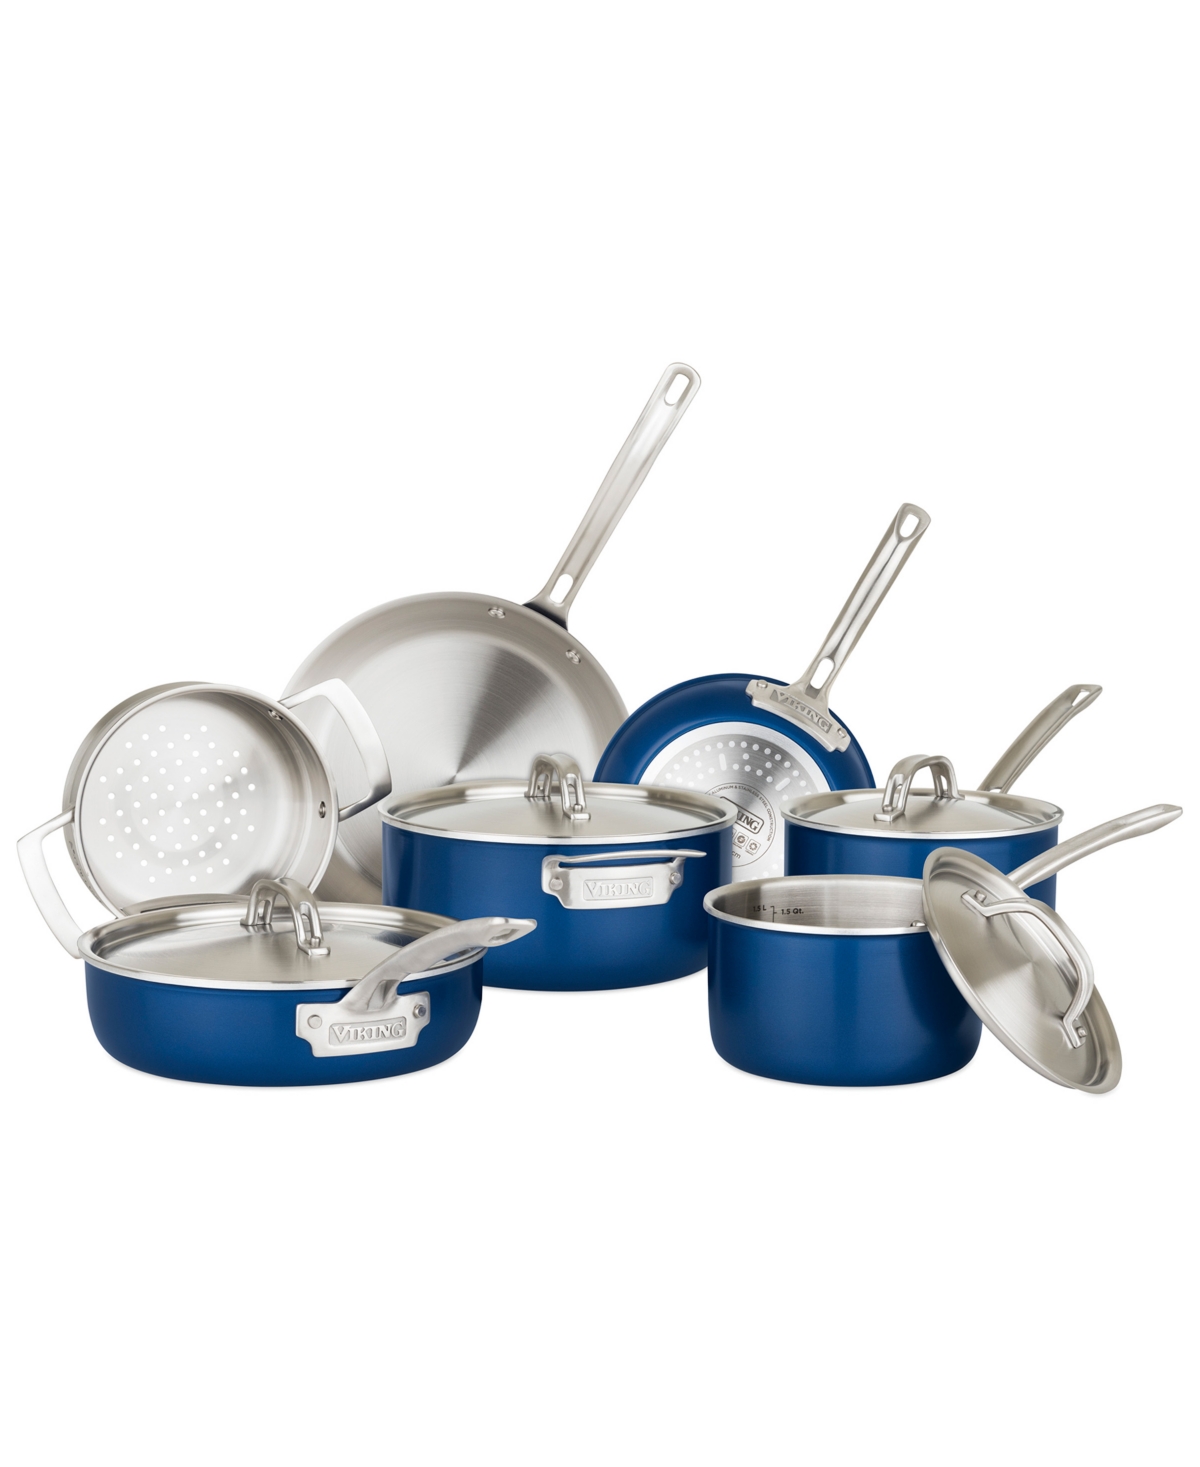 Viking 11-Pc. Stainless Steel Cookware Set